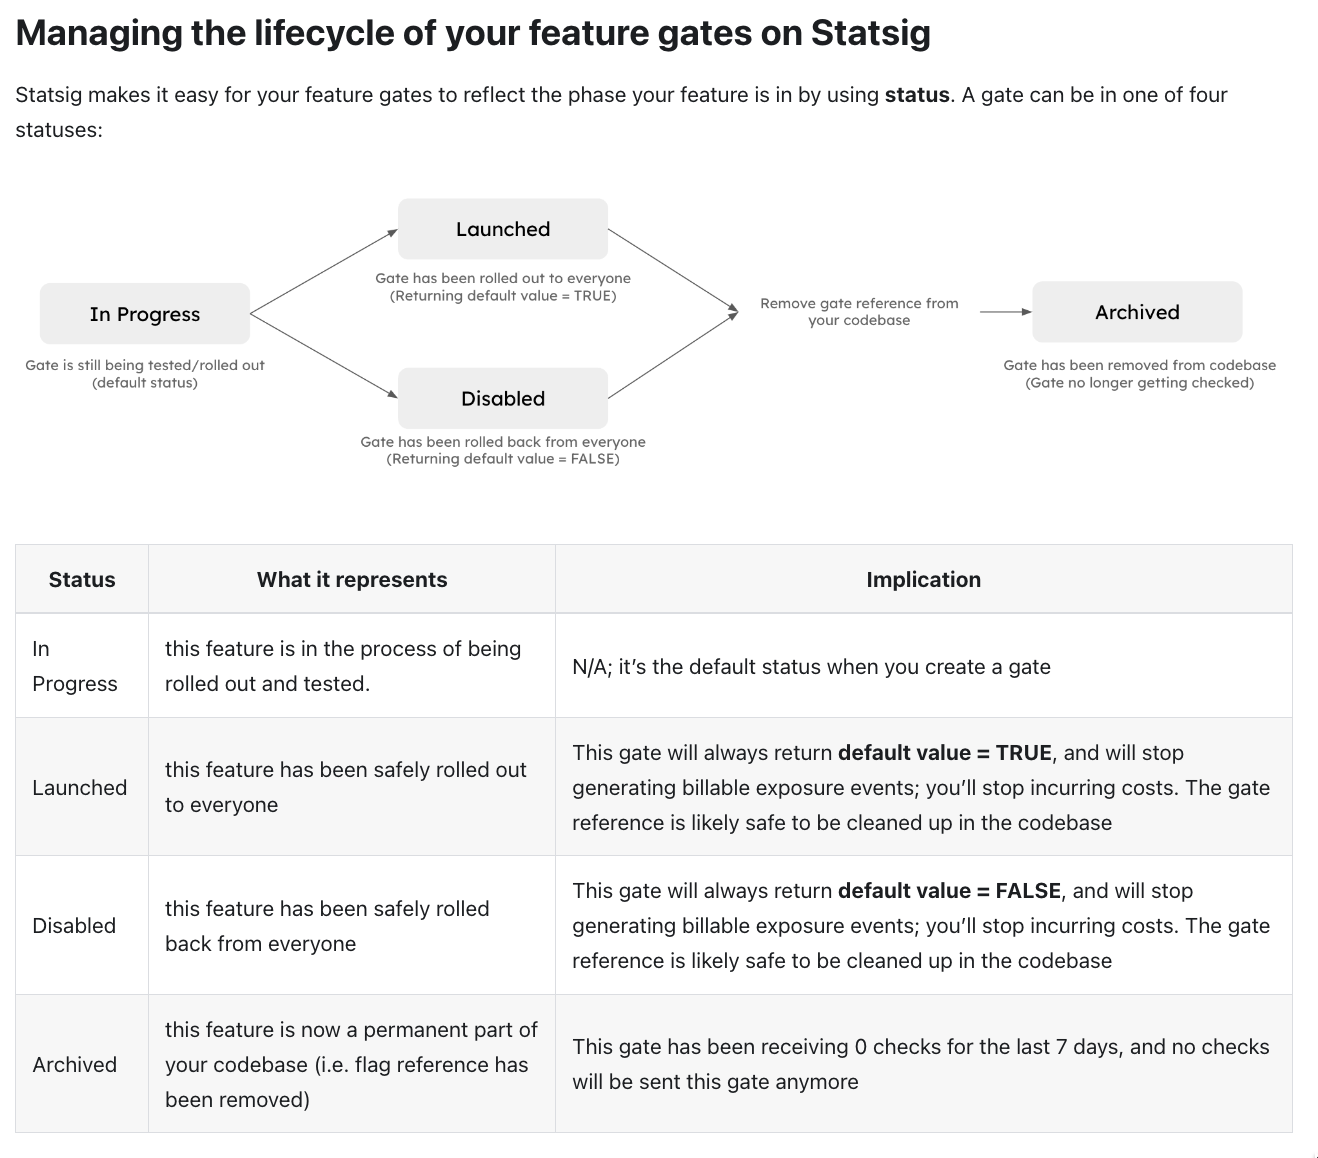 Managing the Lifecycle of Statsig Feature Gates